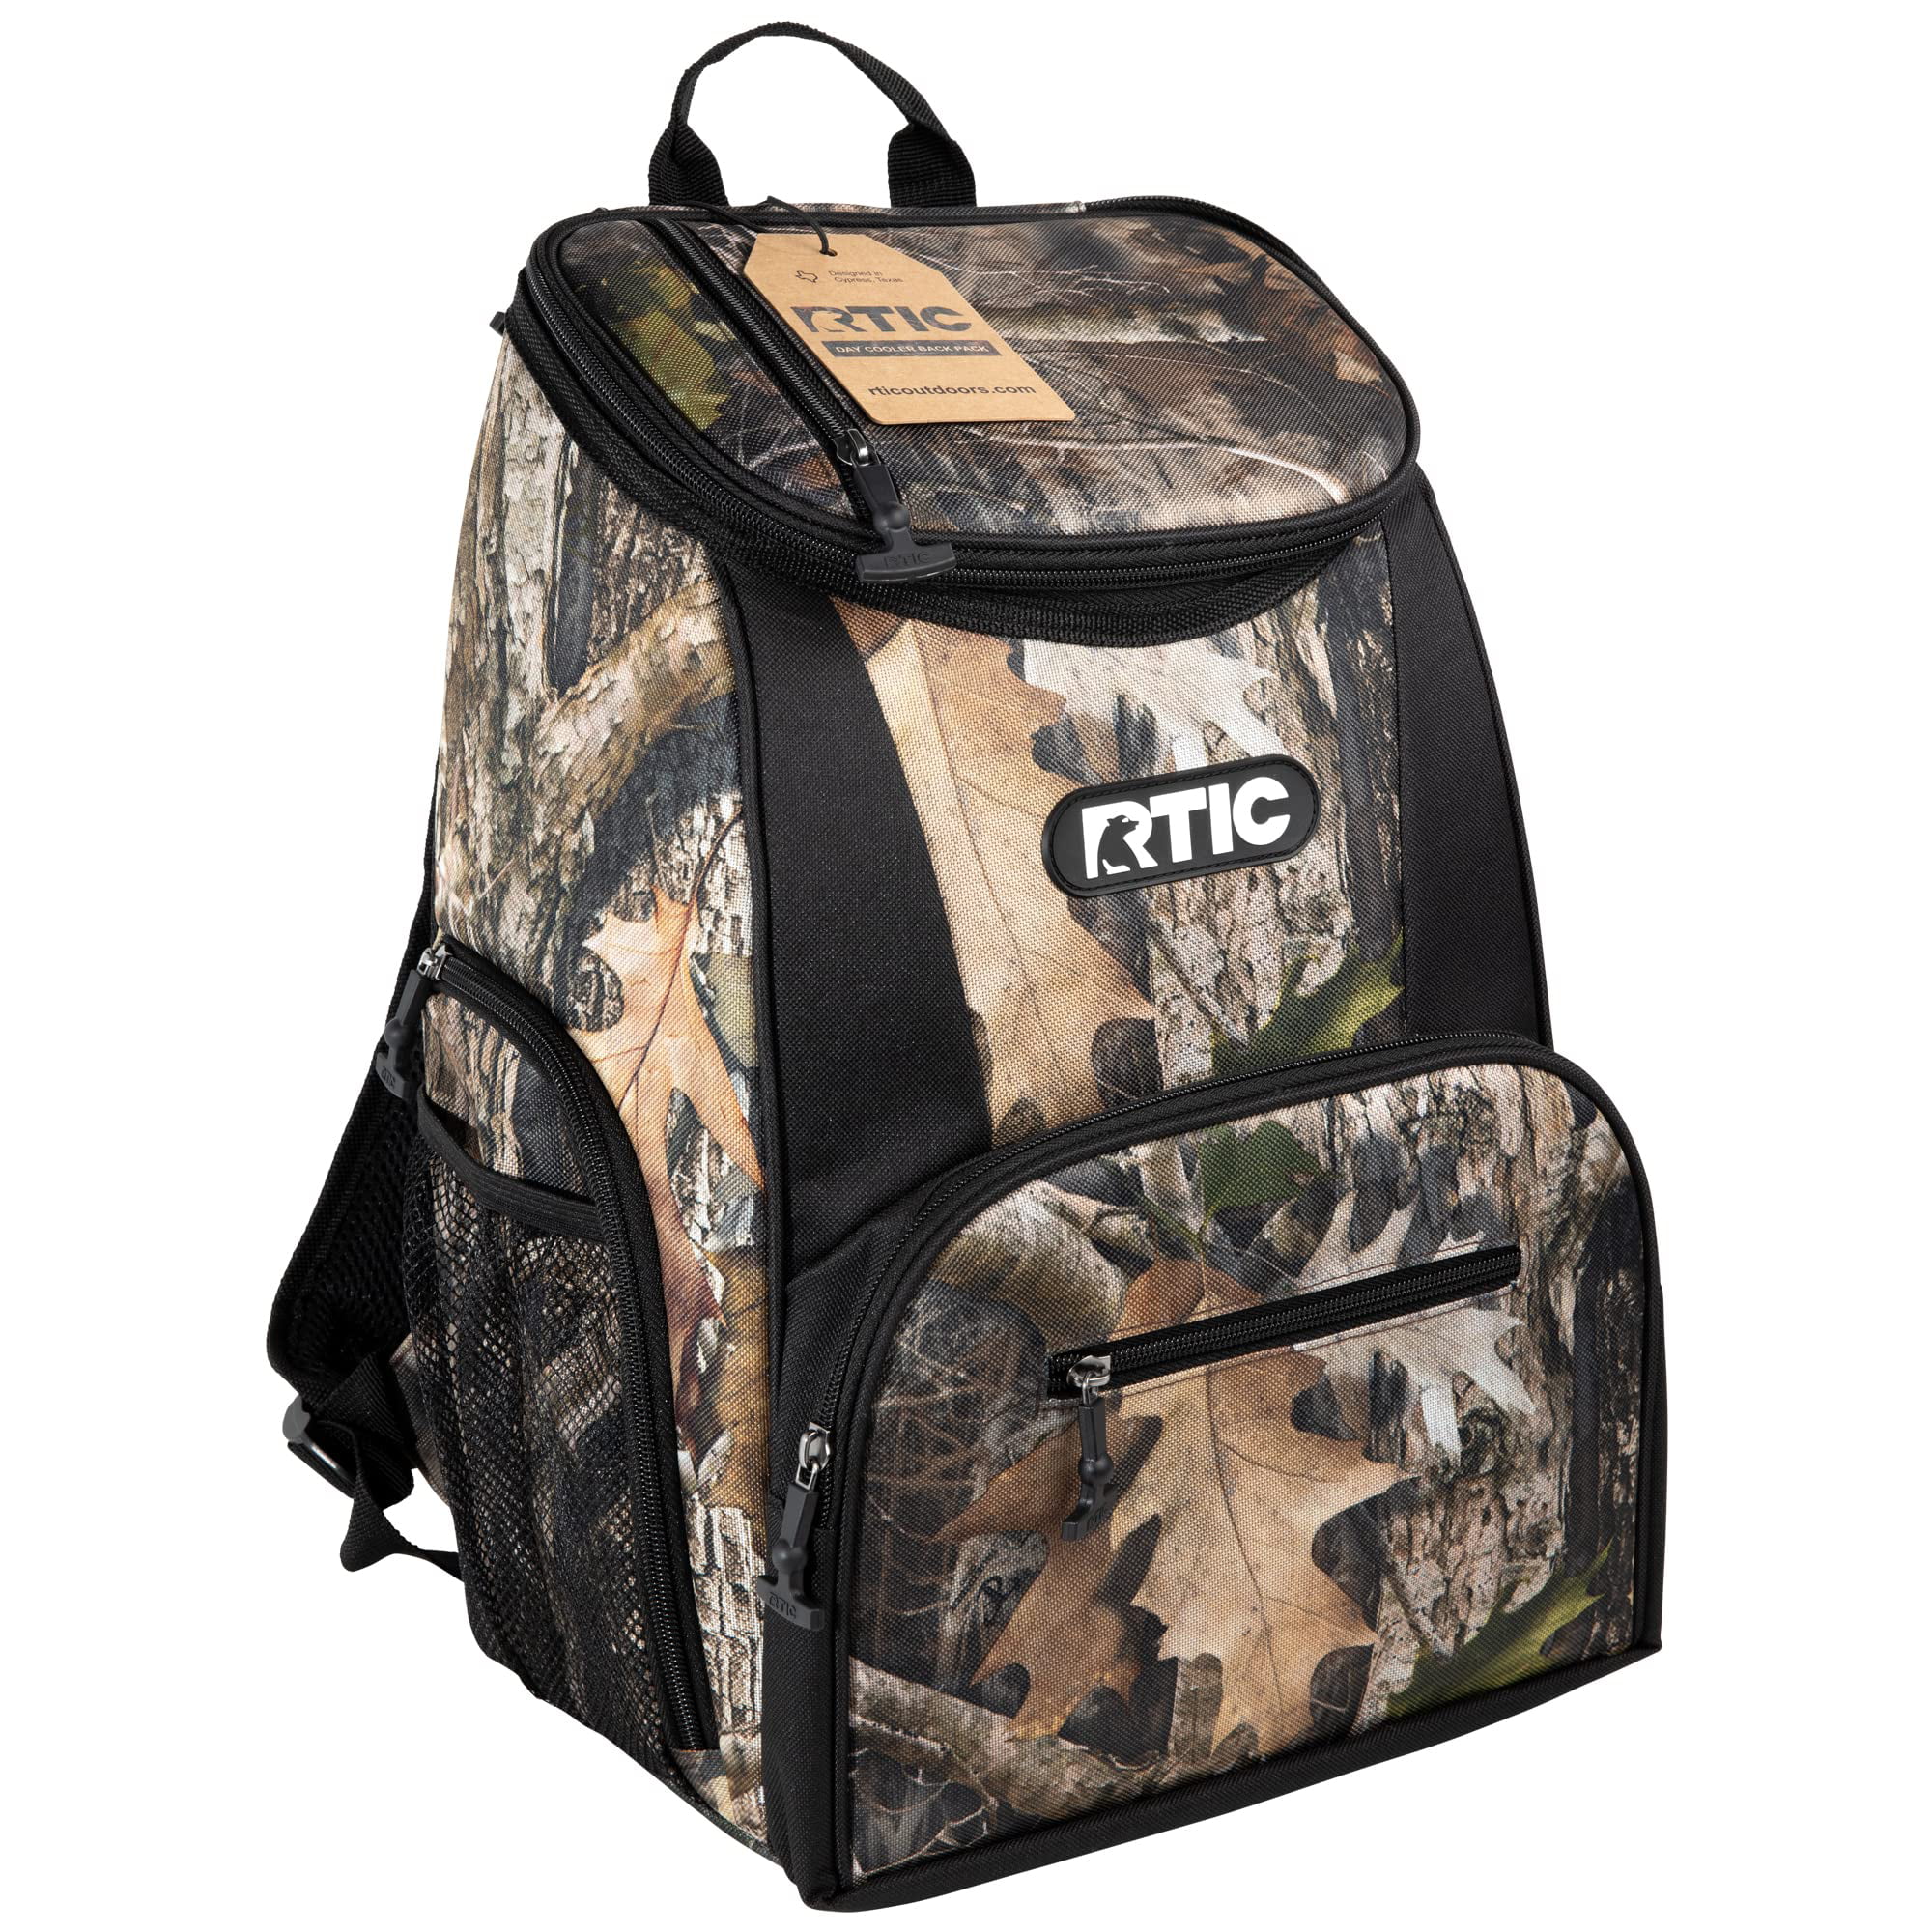 RTIC 15 Can Lightweight Backpack Insulated Cooler with Additional Storage Pockets, Kanati Camo - image 1 of 5